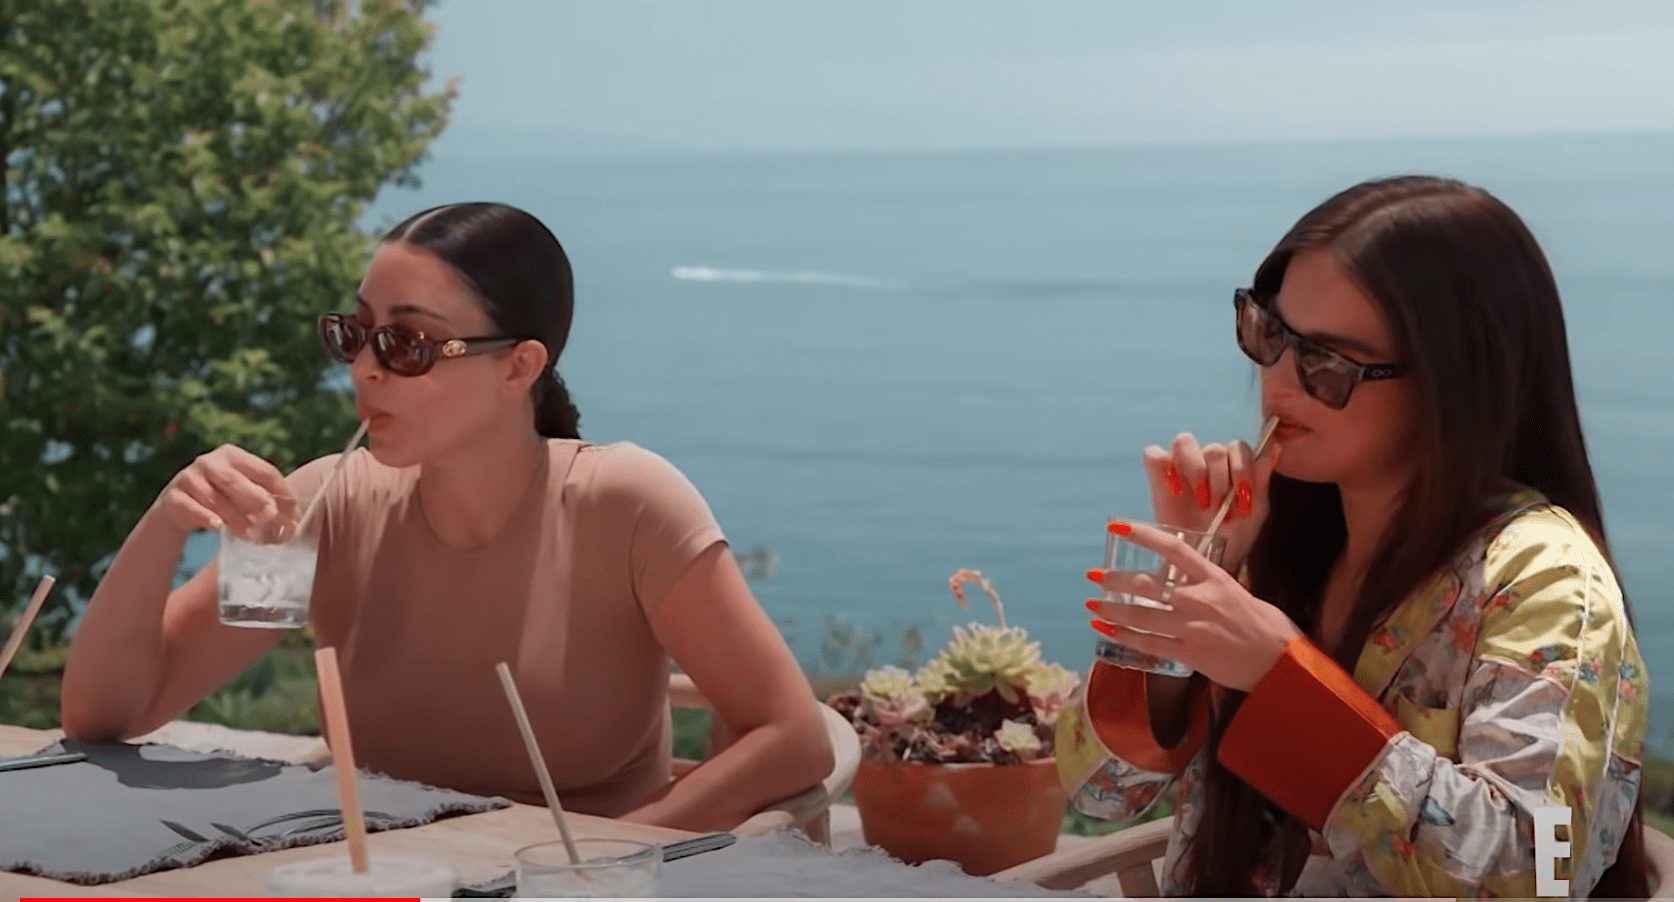 Keeping Up With The Kardashians Season 20 Episode 12  Release Date   Preview - 31